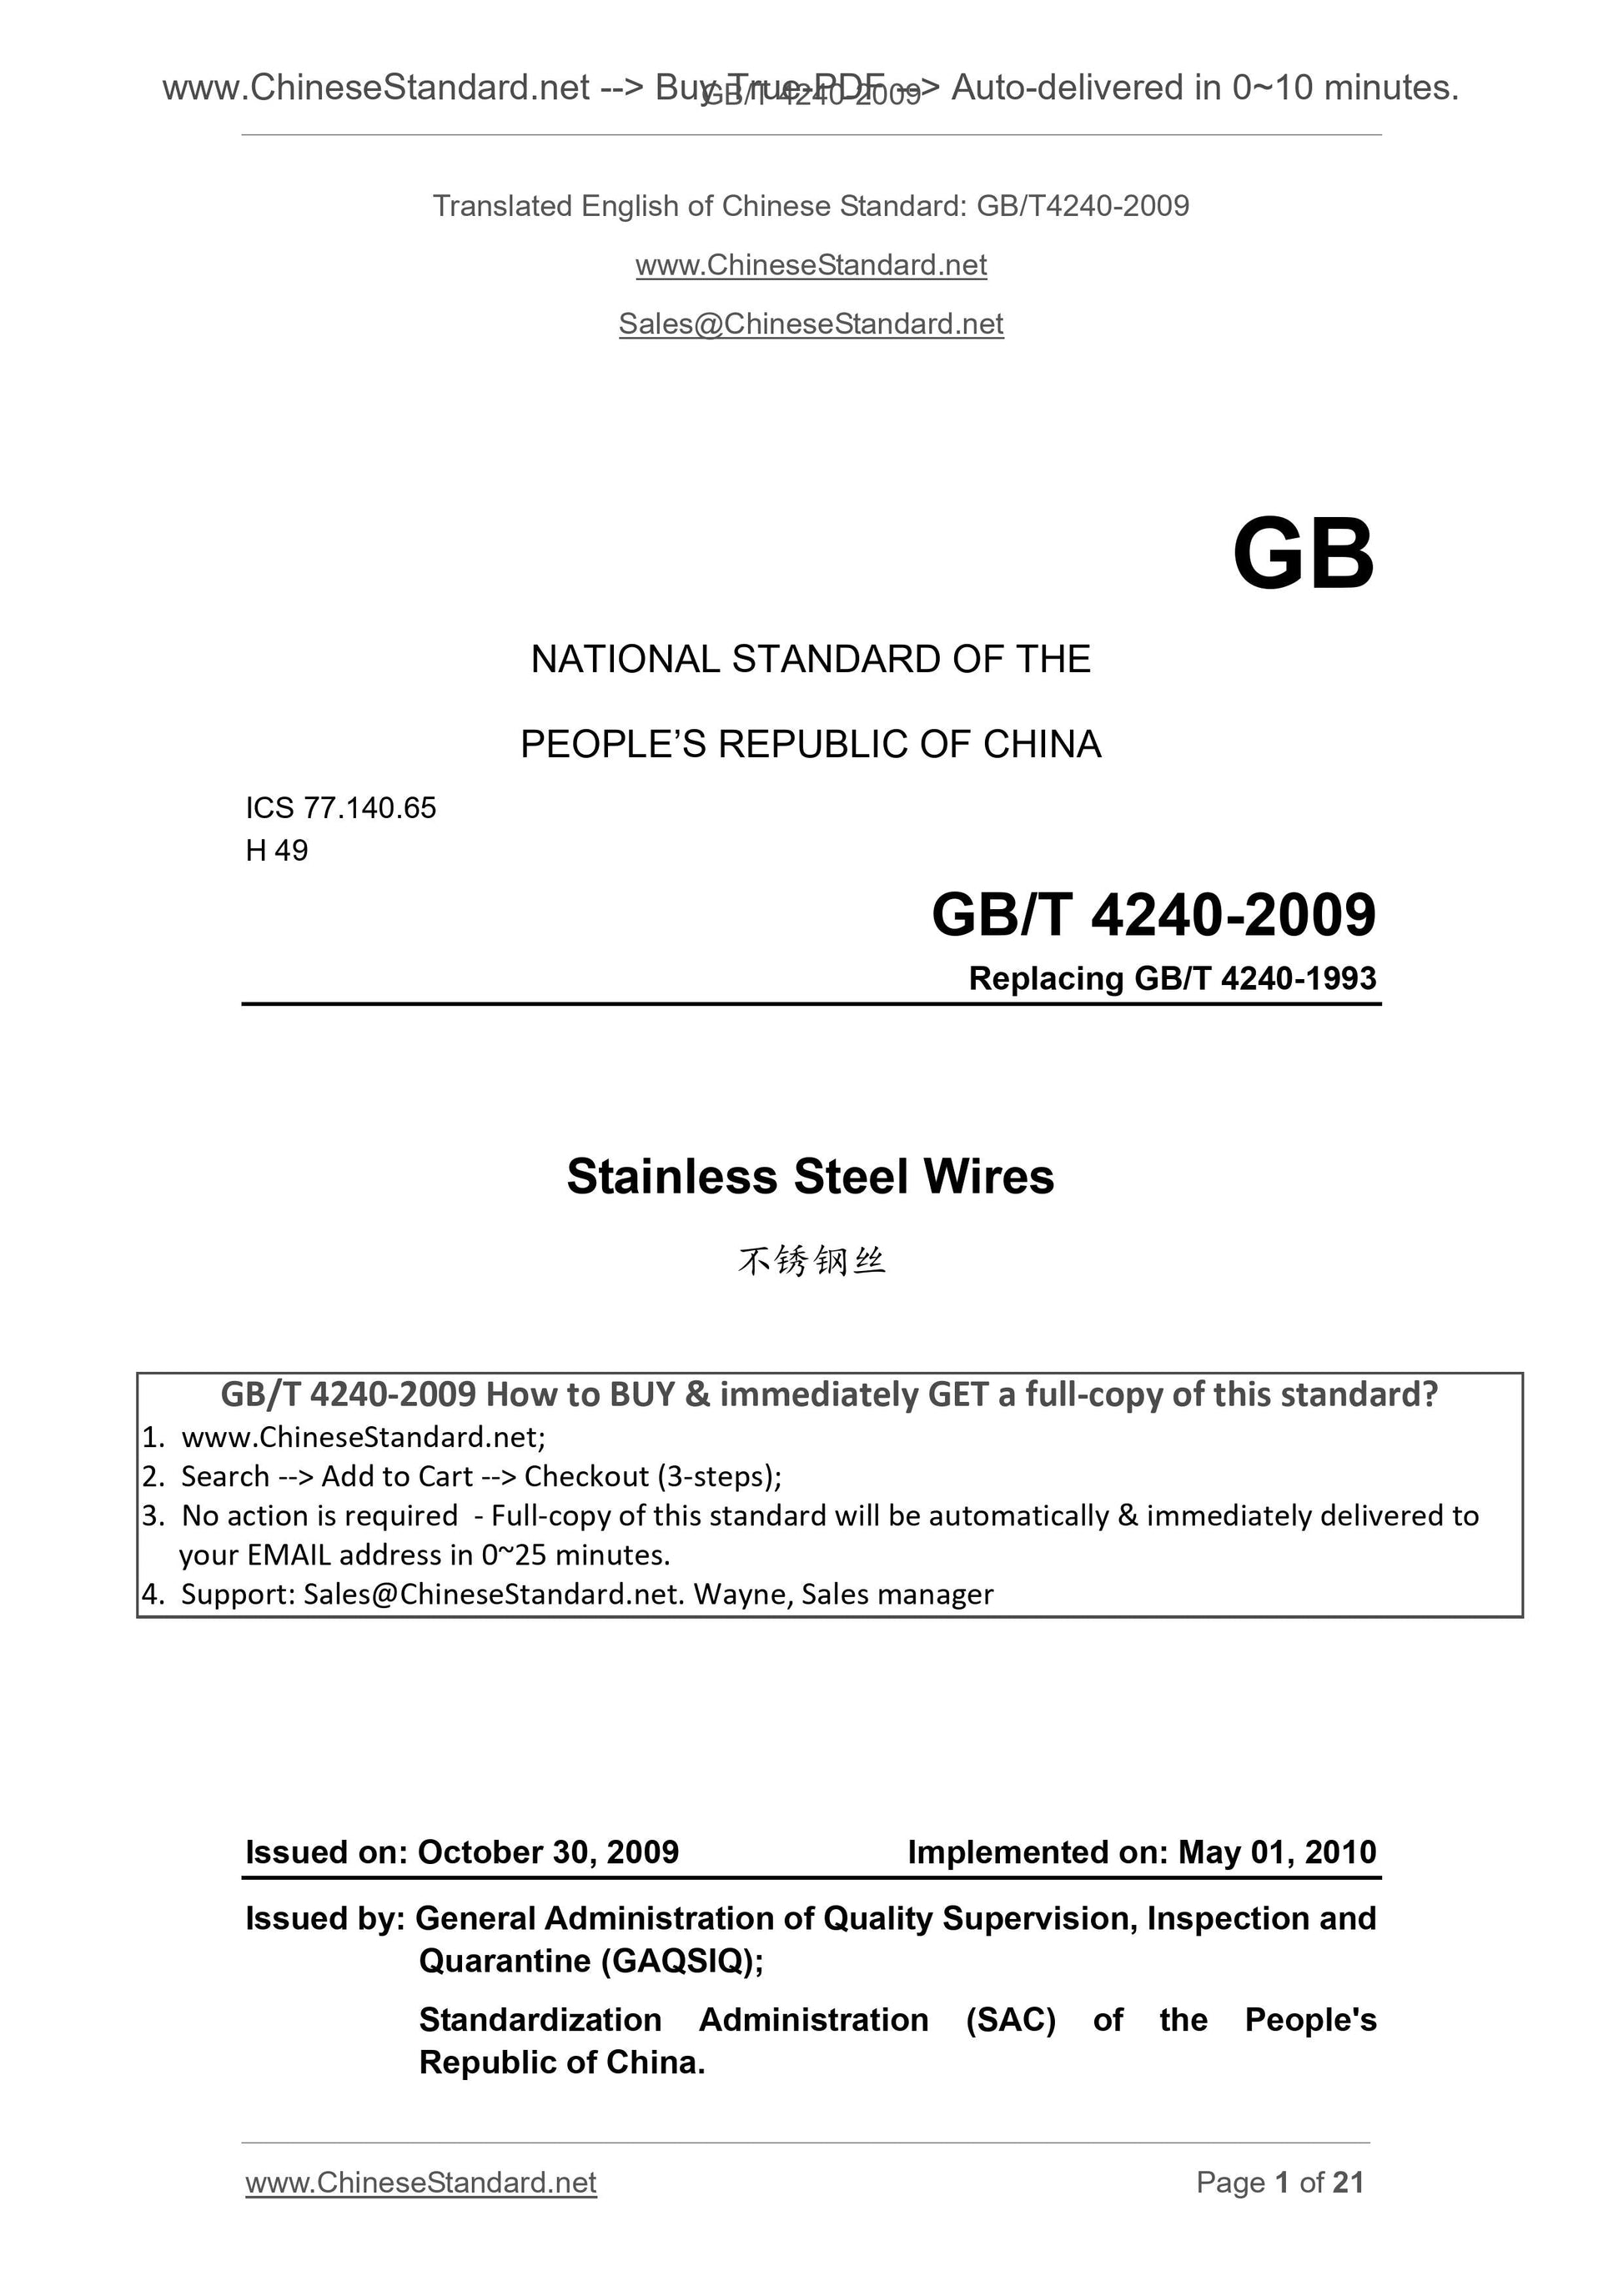 GB/T 4240-2009 Page 1